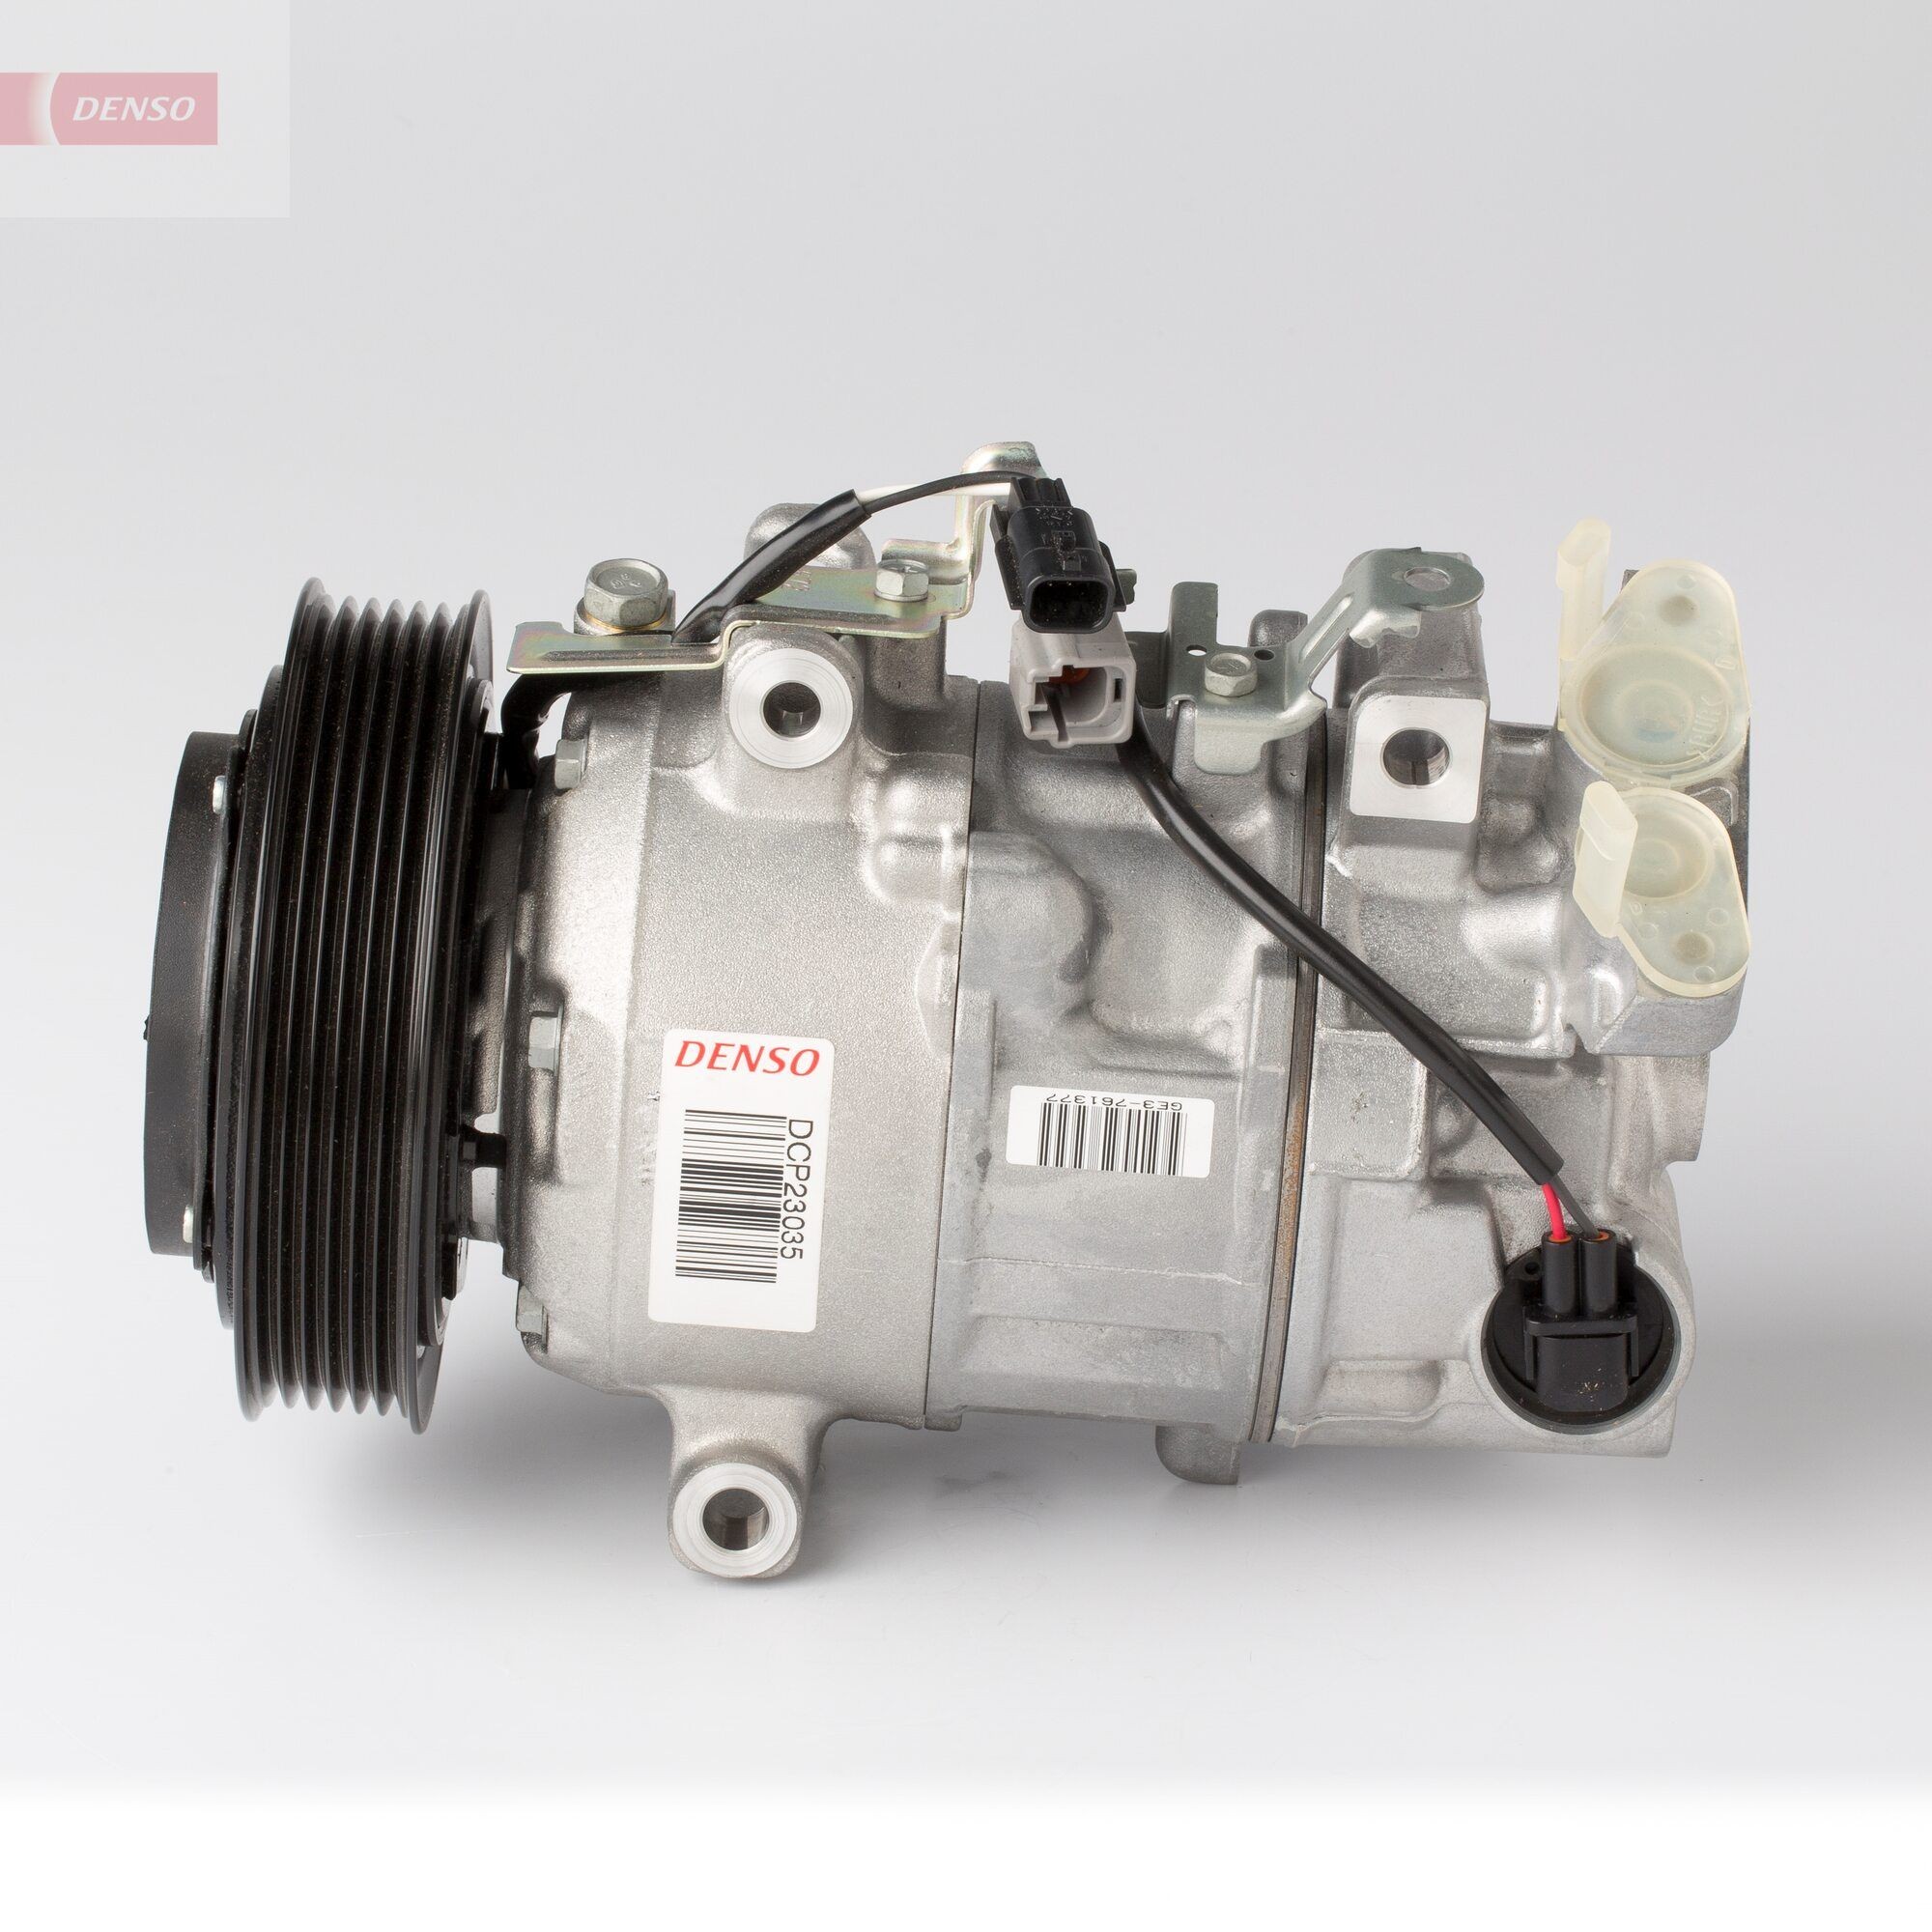 DENSO Air con compressor DCP23035 for RENAULT MEGANE, SCÉNIC, GRAND SCÉNIC